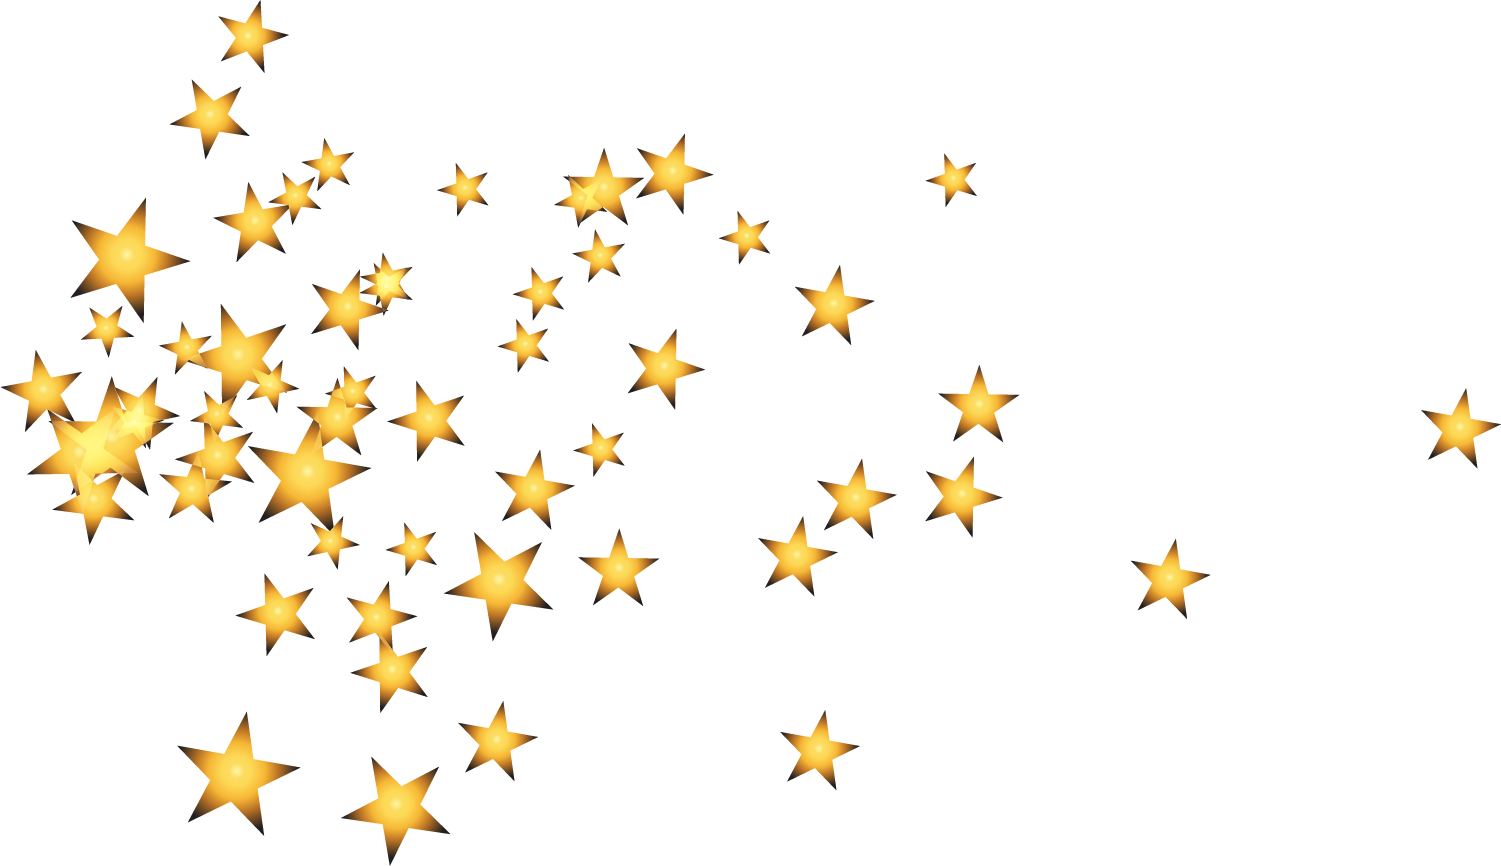 Download 21 star-clipart-no-background Transparent-Background-Stars-Clip-Art-Transparent-Cartoon-.png